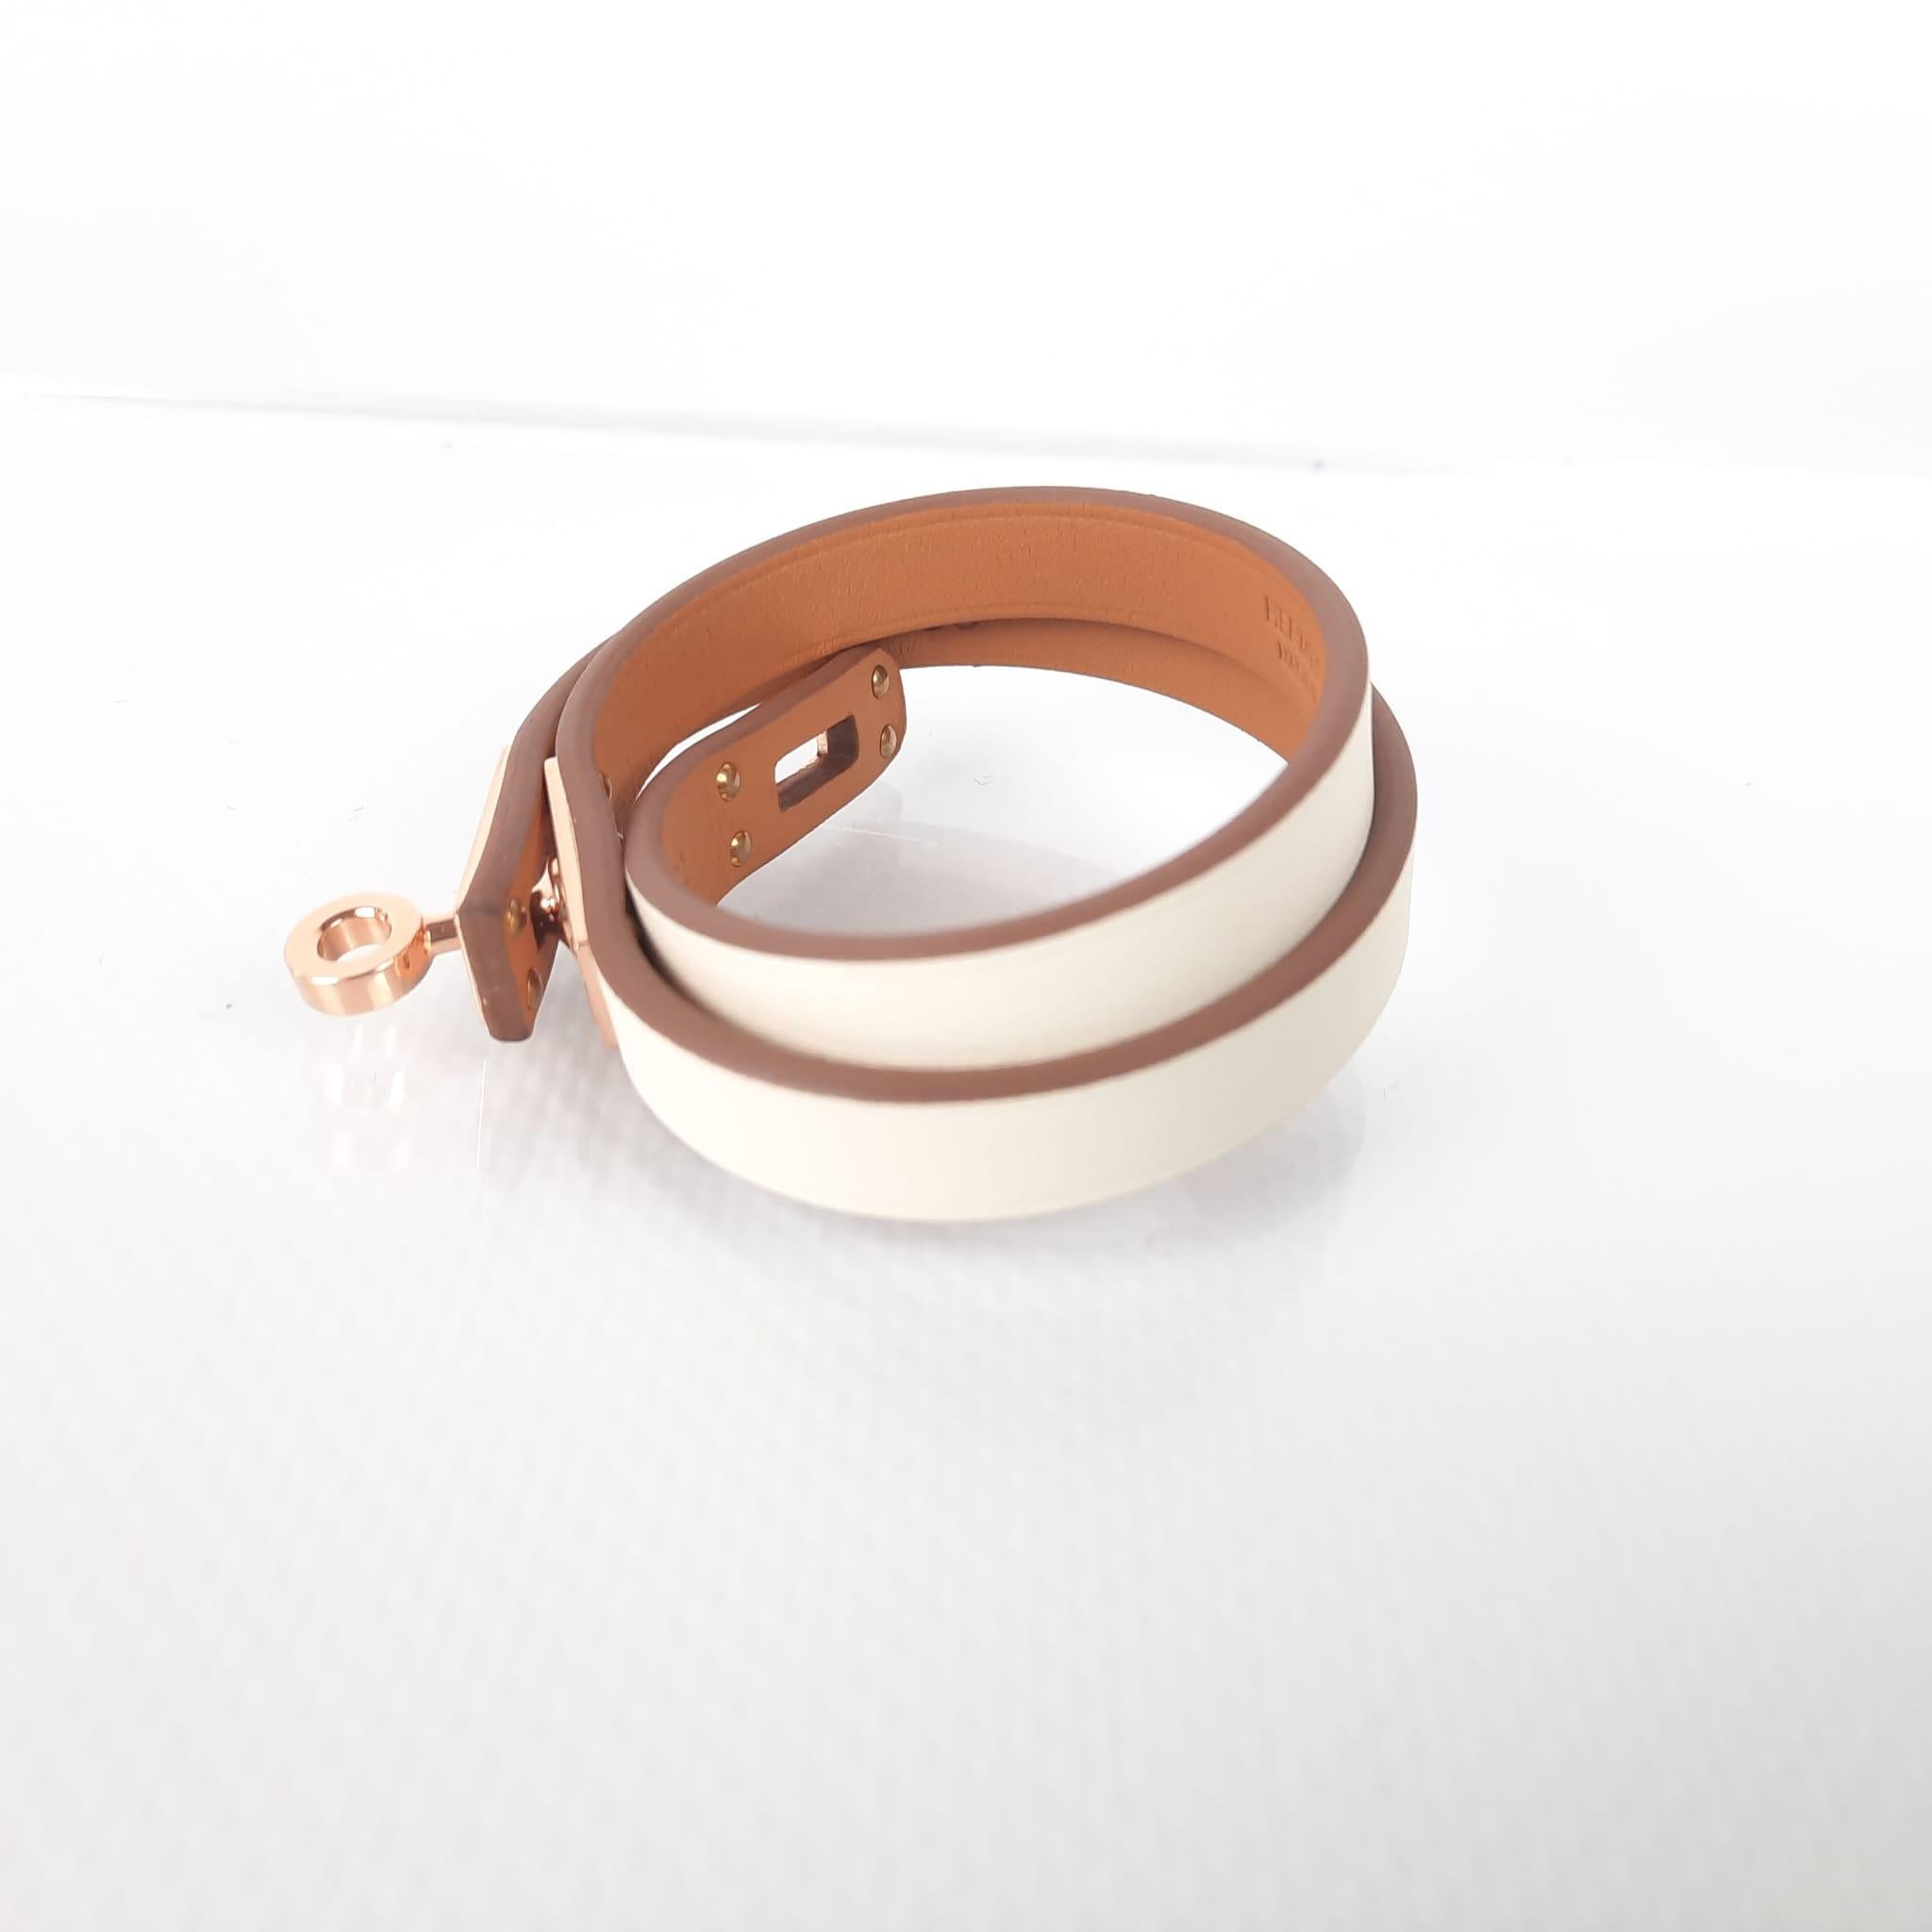 Size T2. Preloved, never used with box. Double tour bracelet in Swift calfskin with rose gold-plated mini Kelly closure. Wrist size from 14,5 cm to 15,5 cm
Leather width: 1 cm